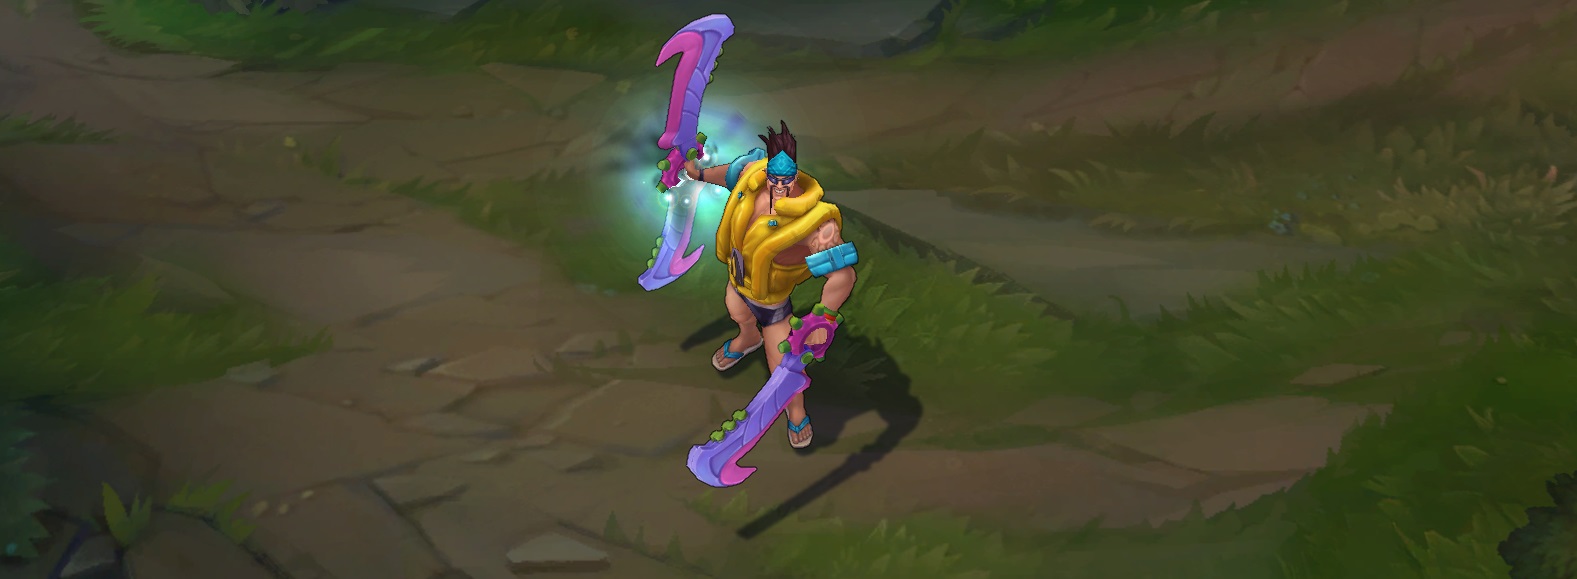 pool party draven skin for league of legends ingame picture